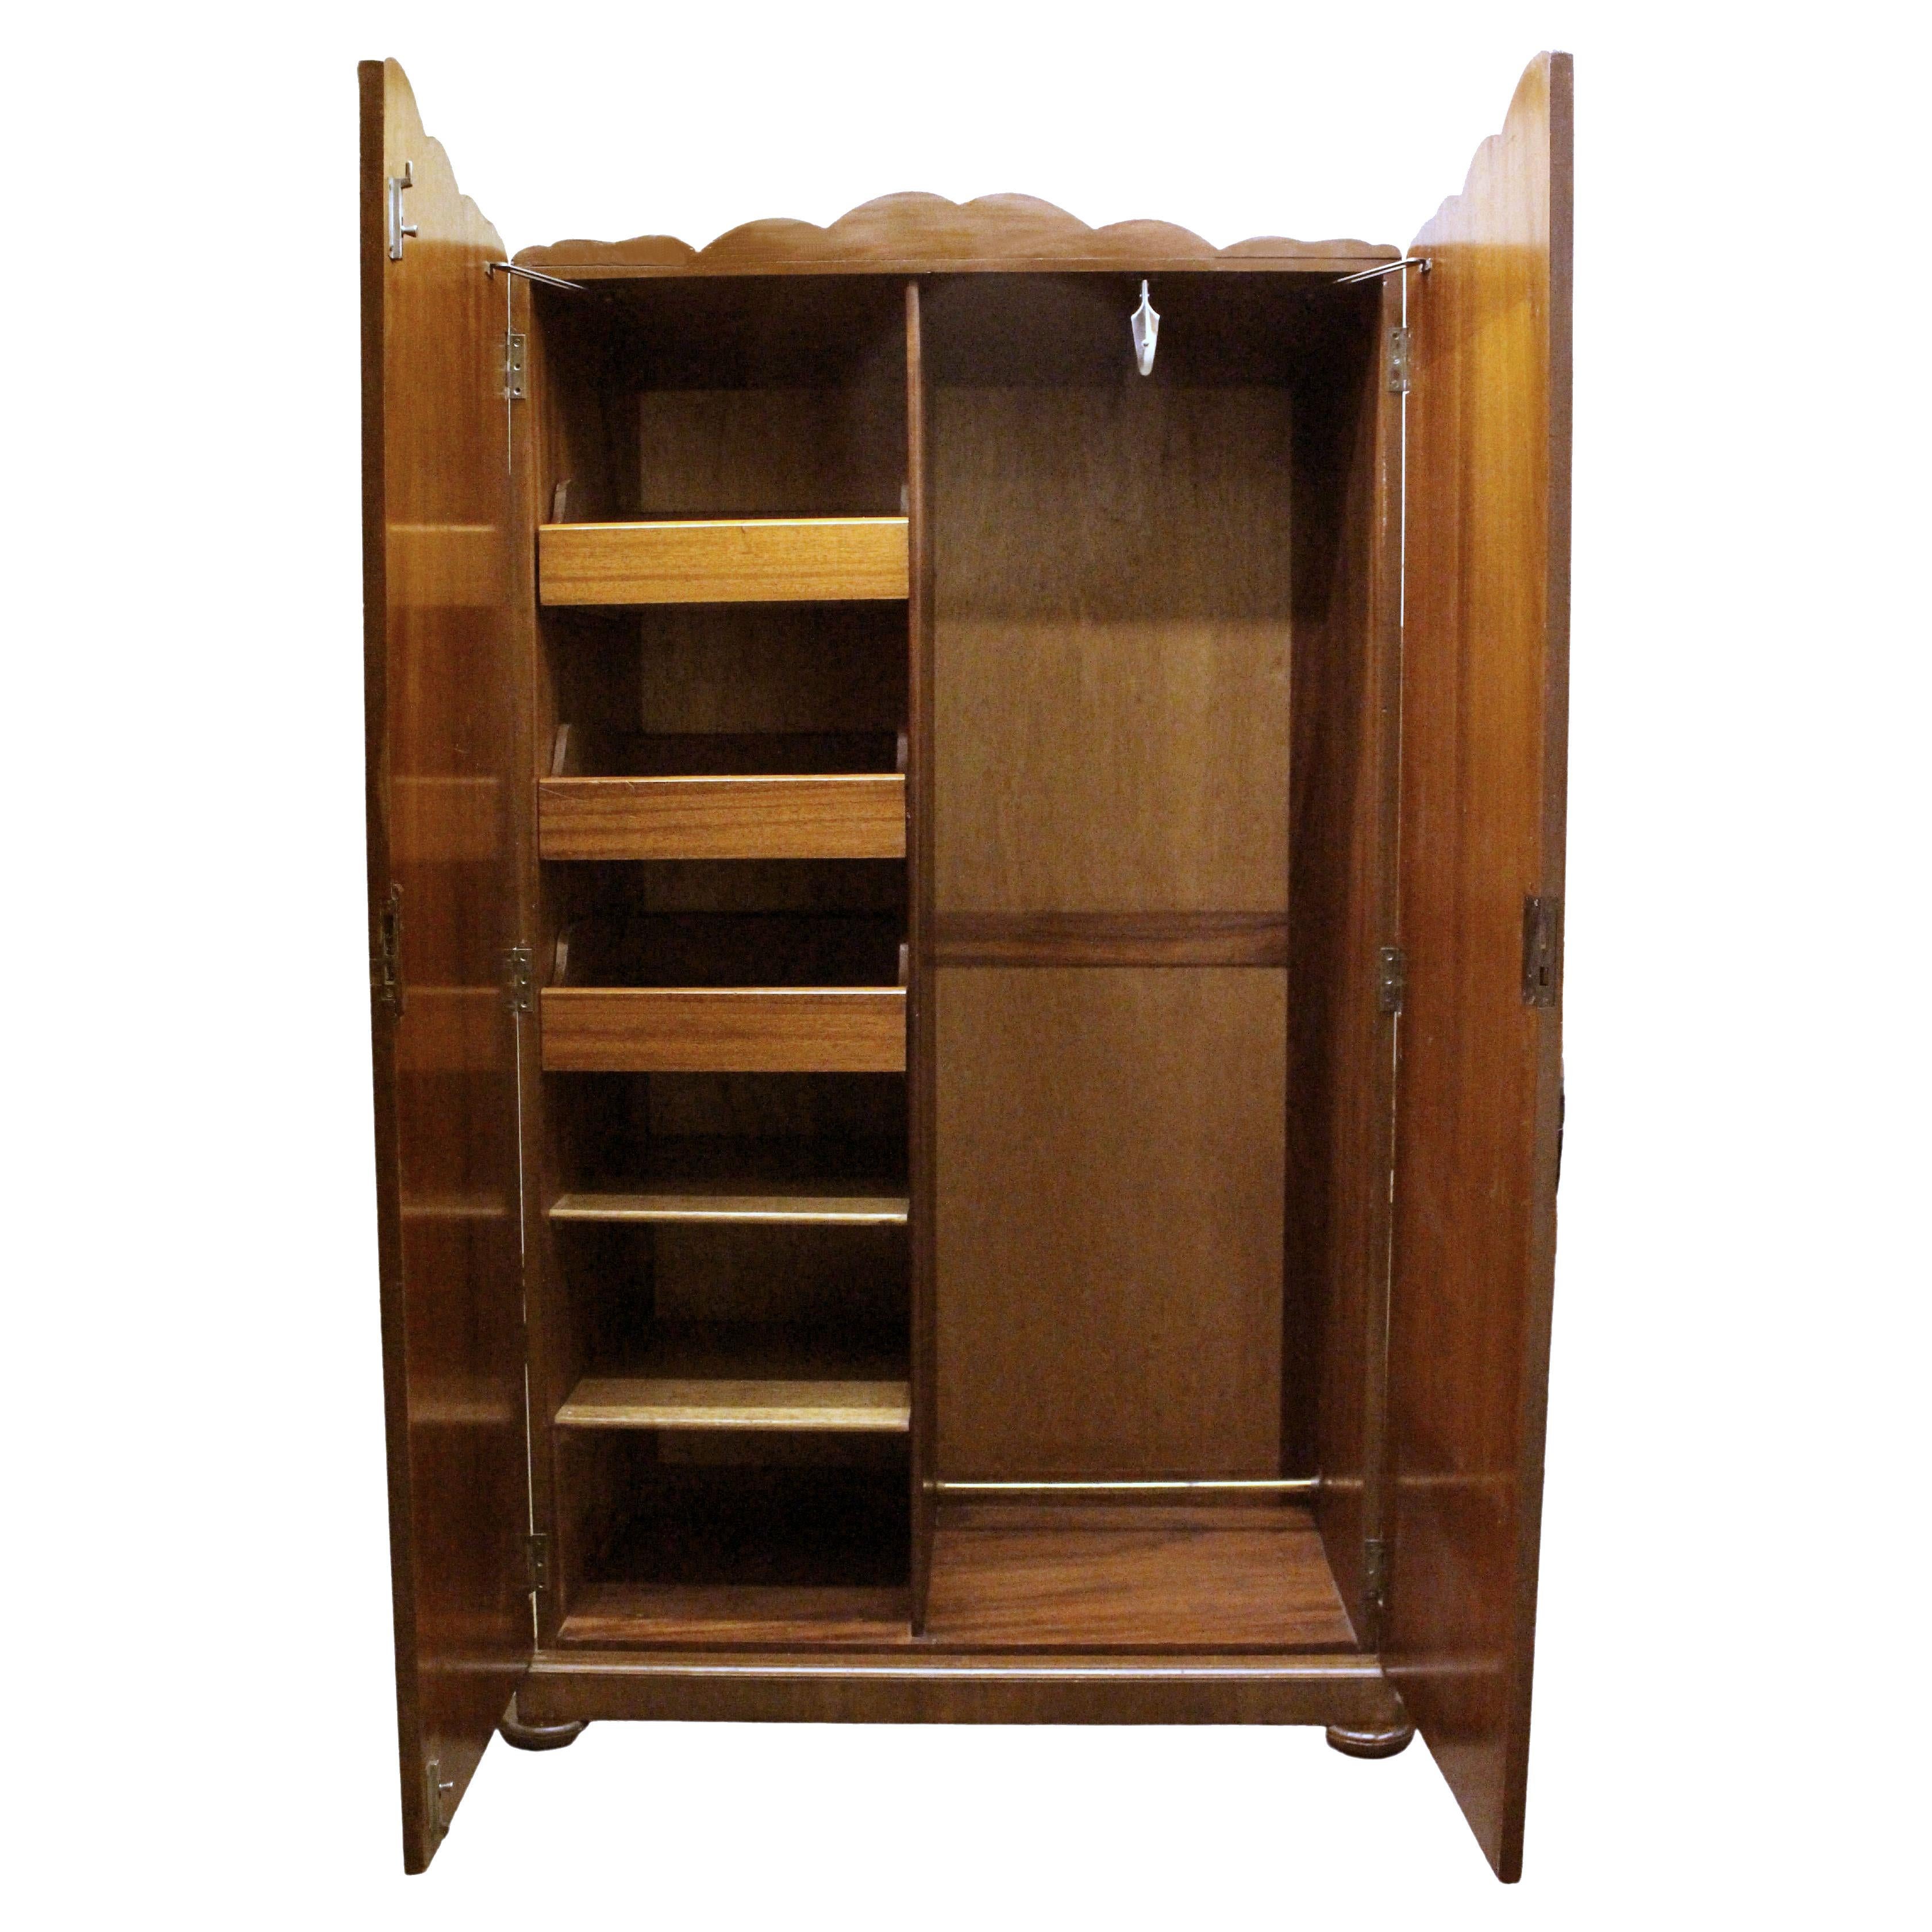 For your consideration is this very impressive looking Art Deco two door large single wardrobe. Dating to the 1930's the quality throughout this piece is of the highest spec with no expense spared and will easily integrate in both modern and period